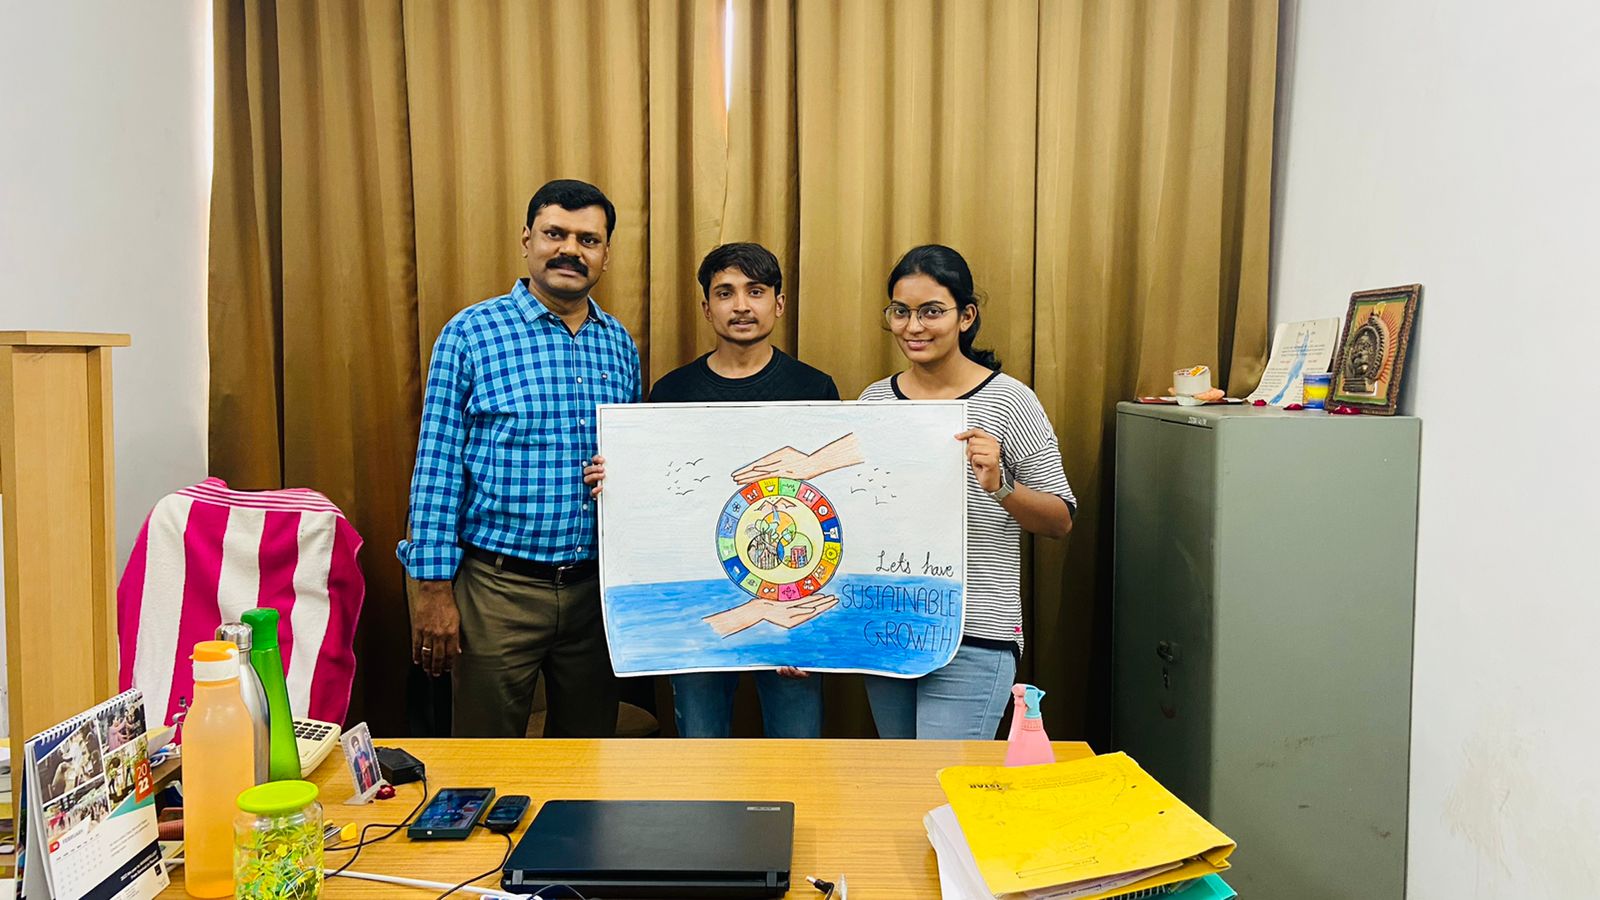 On the Spot painting Competition on the Occasion of 'National Science Day' 2022
[ 1st Prize : Dhruti Soni and Zeel Patel ] 